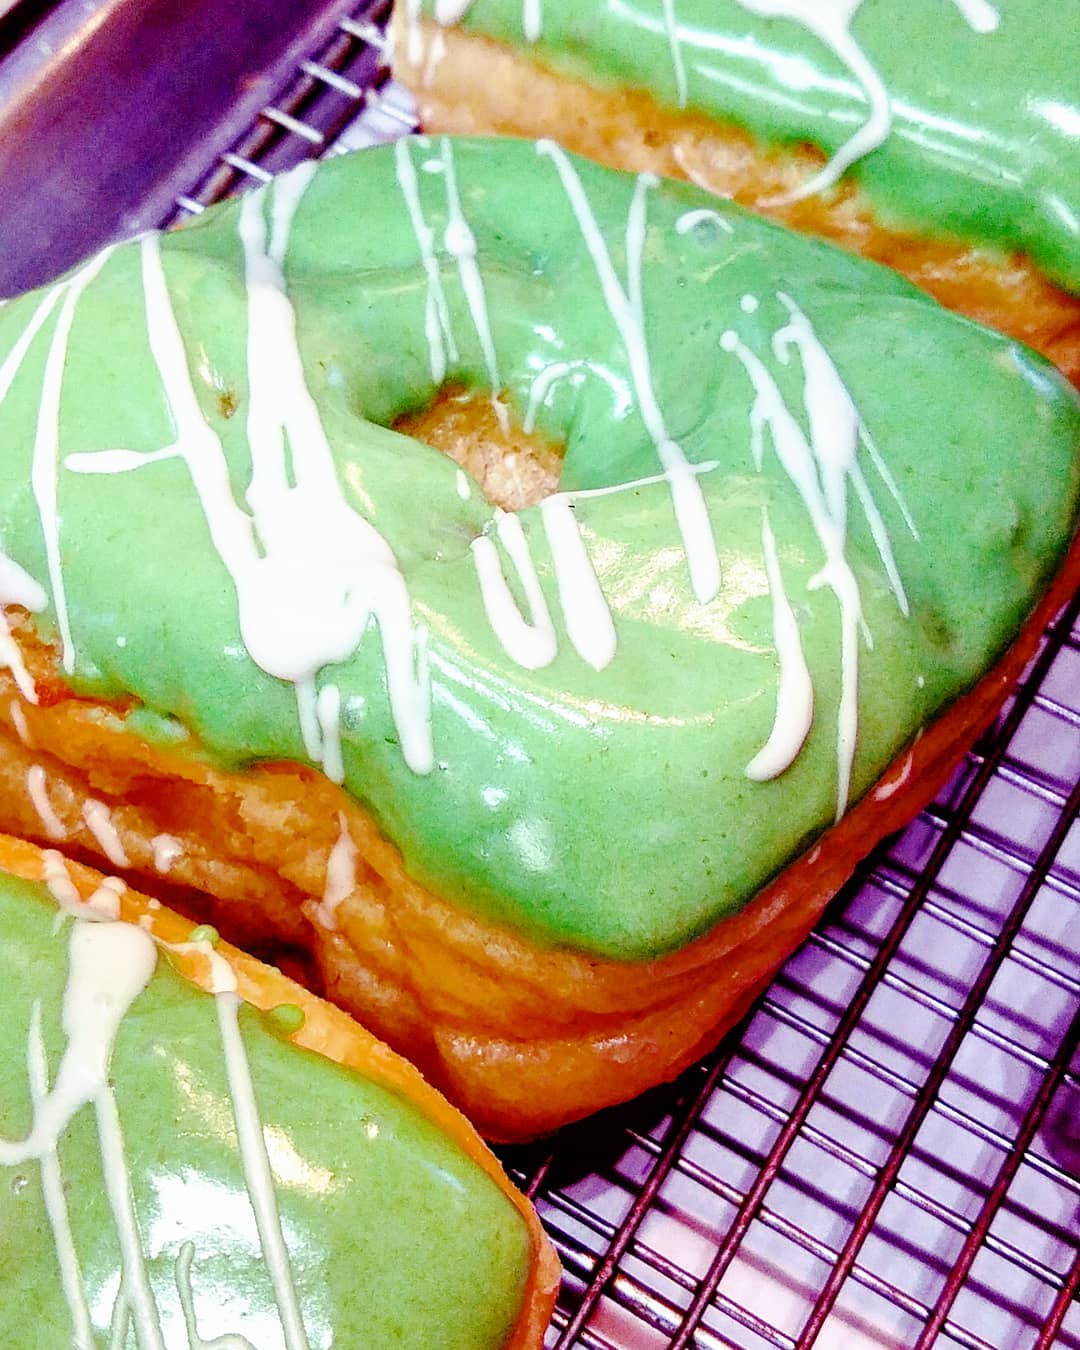 Yup. The SHENANIGANS Doughnut. Green Apple with Vanilla. Yummy and Real.
🍀❤️☘️😏🍀😄☘️😊☘️😍🍀😏☘️😂🍀🤗🍀🙄☘️
Start your Shammy Day off right…great foundation for your paddy day shenanigans tonight!!!
☘️
@bellekitchenokc #doughnut #doughnuts #stpatricksday #donut #donuts #okc #green #fun #irish #keepitlocalok #instagood #instafood #dessert #square #love #bonappetit #food #foodie #foodporn #foodpics #beautiful #bellekitchen 🍀☘️🍀